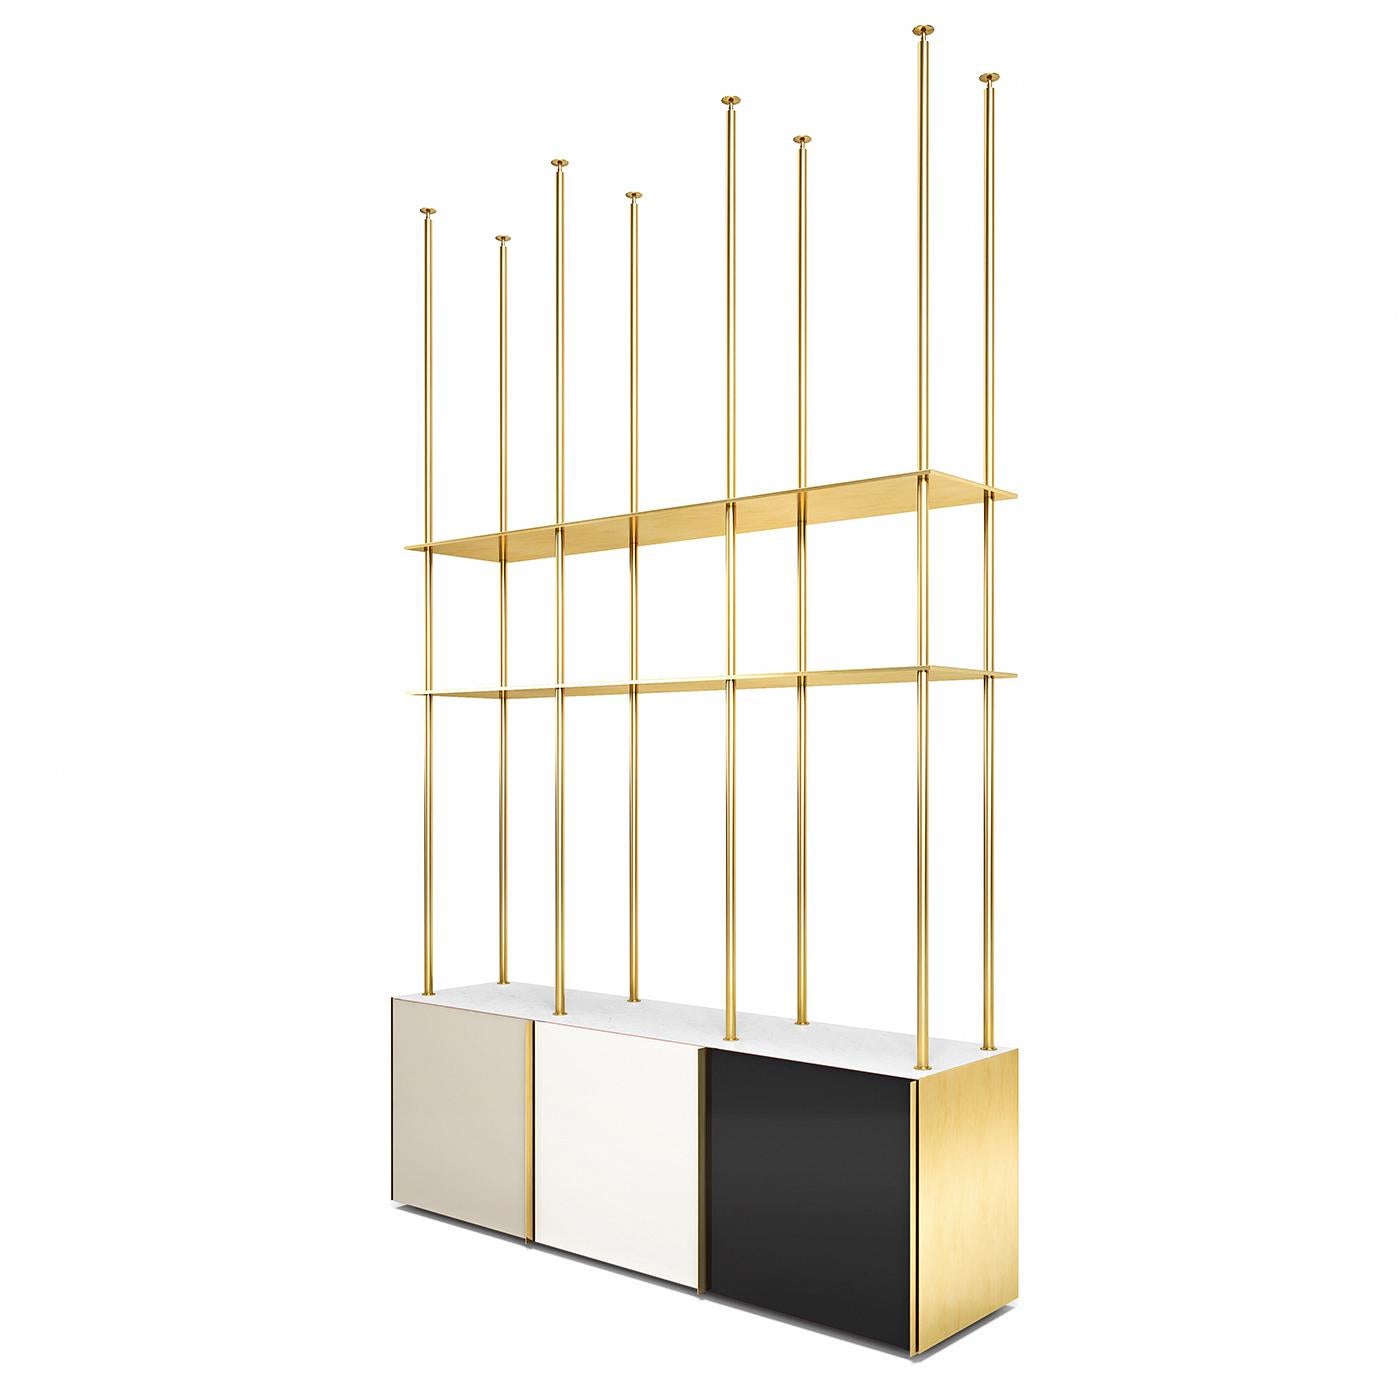 Equally stunning as a room divider or to simply keep books organized, this floor-to-ceiling bookcase is a custom-made piece whose height is determined by the customer's ceiling. The lightweight shelving unit in glossy brass stems from a 3-door